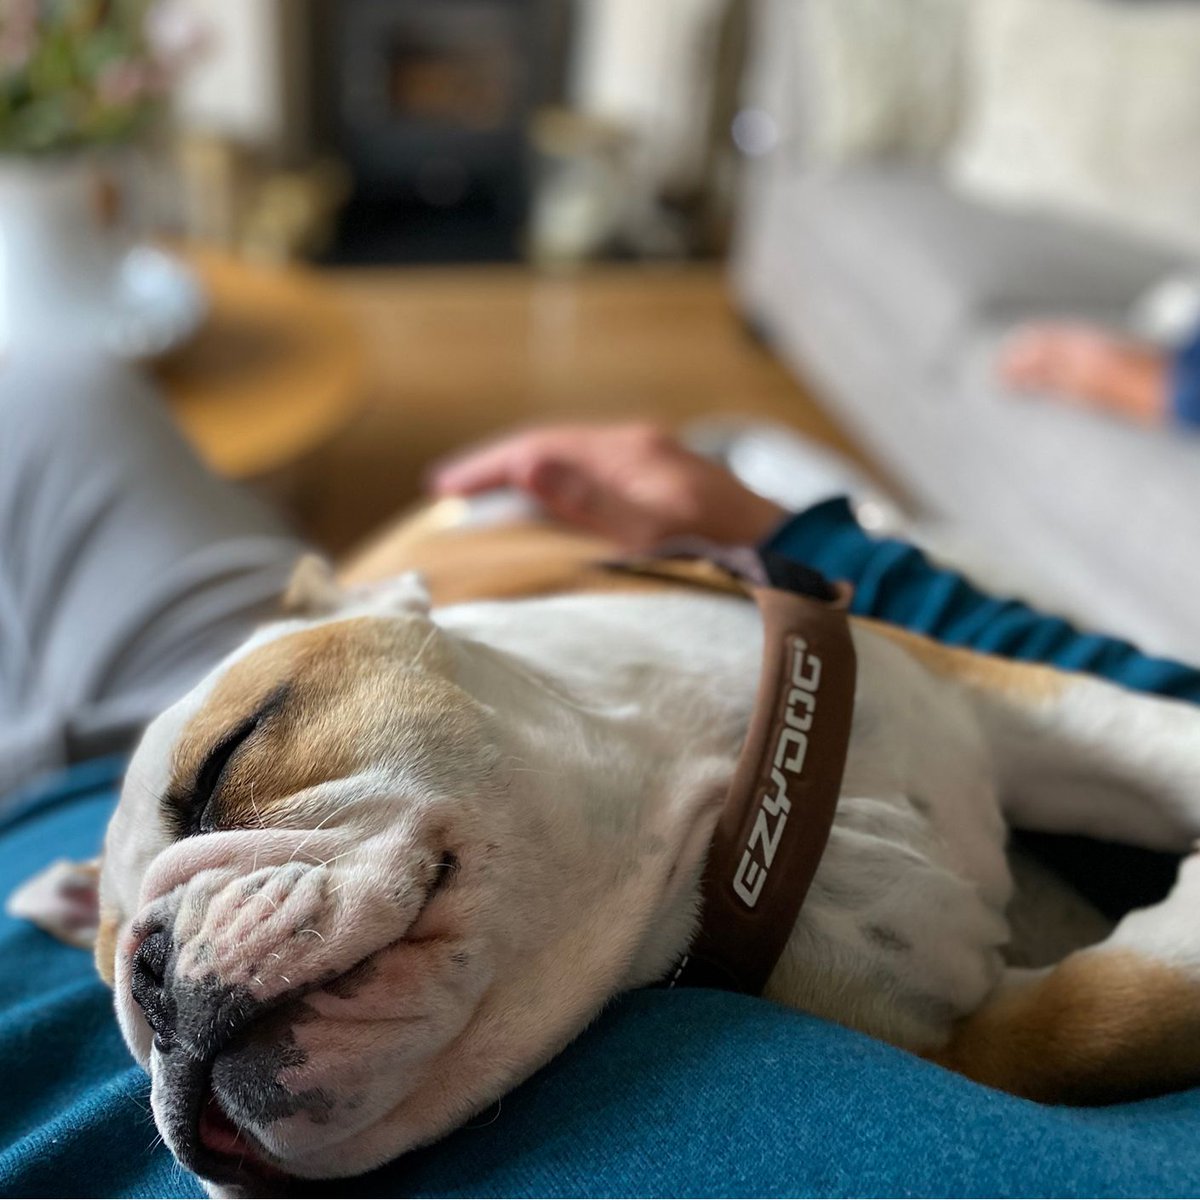 That time the urgent puppy #Snooze kicked in, and I was still in my harness! 💤 💤 Happy #ThrowbackThursday everyone 🐶🐾❤️ Barney #BarneyTheBulldog #DogsOfTwitter #DogsOfX #DogsOfIG #DogsOfFacebook #Bulldog #EnglishBulldog #TBT #Puppy #Throwback